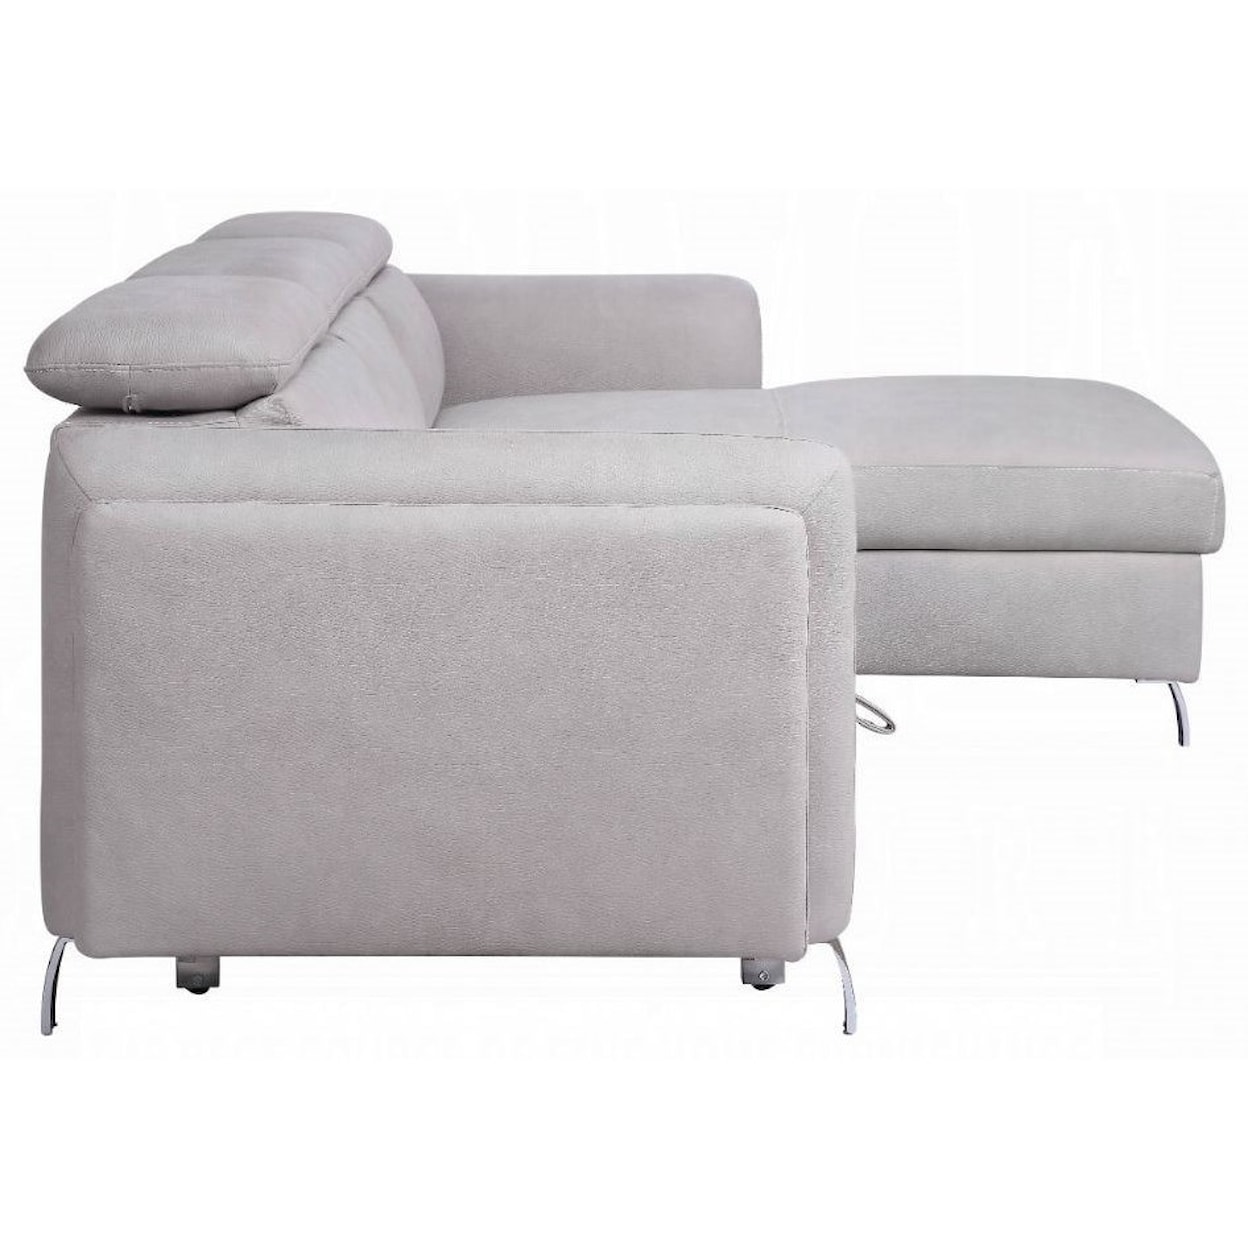 Acme Furniture Reyes Sectional Sofa with Sleeper